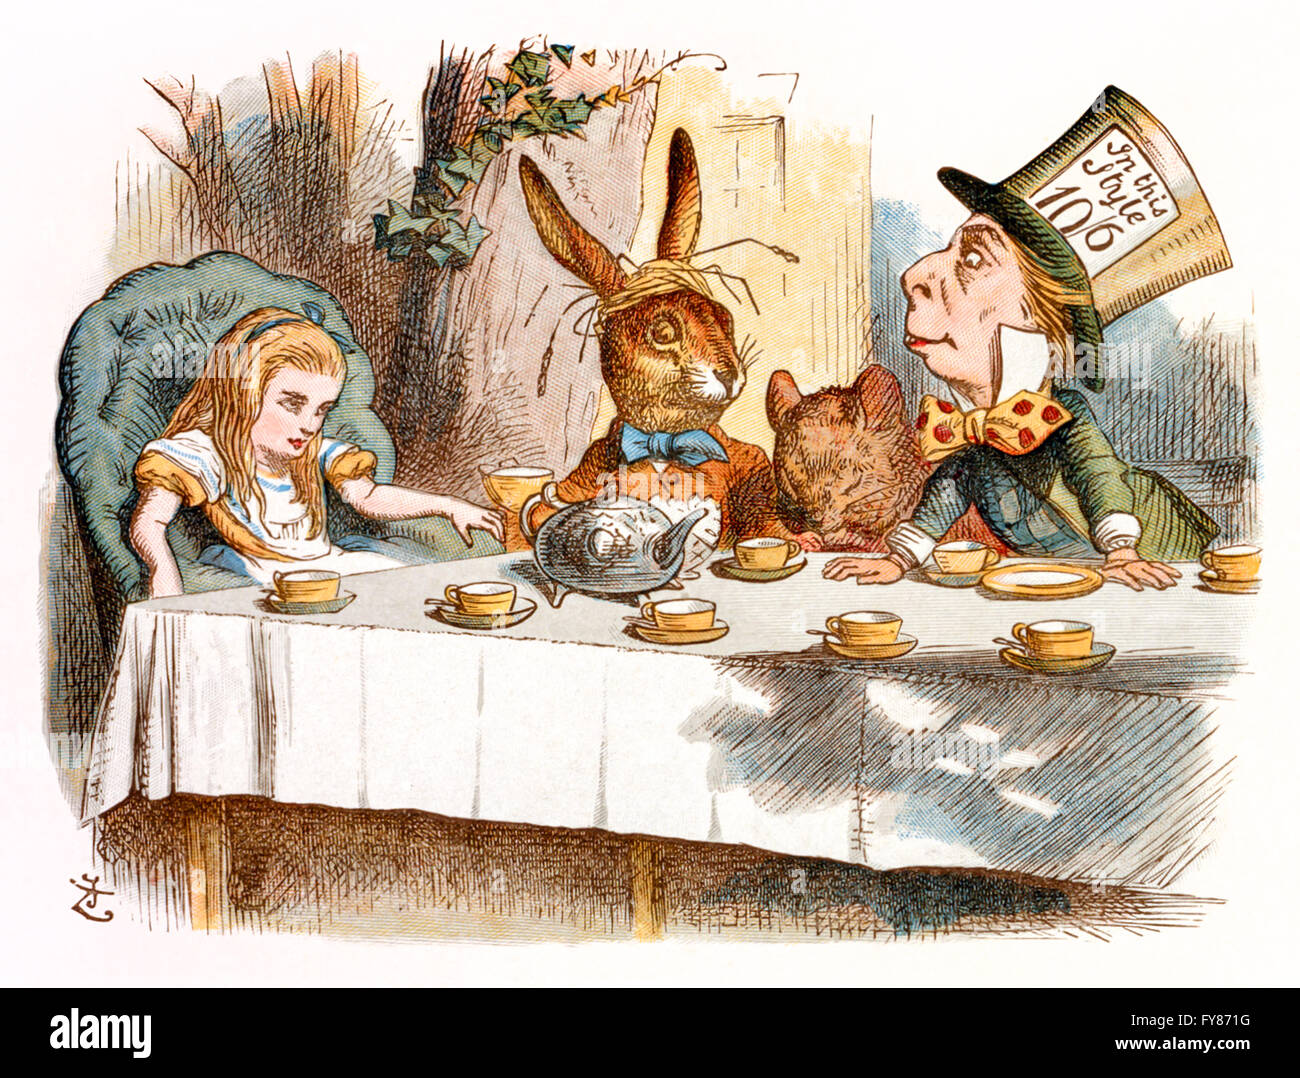 The Mad Tea Party, from 'The Nursery “Alice'', an shortened adaptation of ‘Alice’s Adventures in Wonderland’ aimed at under-fives written by Lewis Carroll (1832-1898) himself. This edition contains 20 selected illustrations by Sir John Tenniel (1820-1914) from the original book which were enlarged and coloured by Emily Gertrude Thomson (1850-1929). Stock Photo